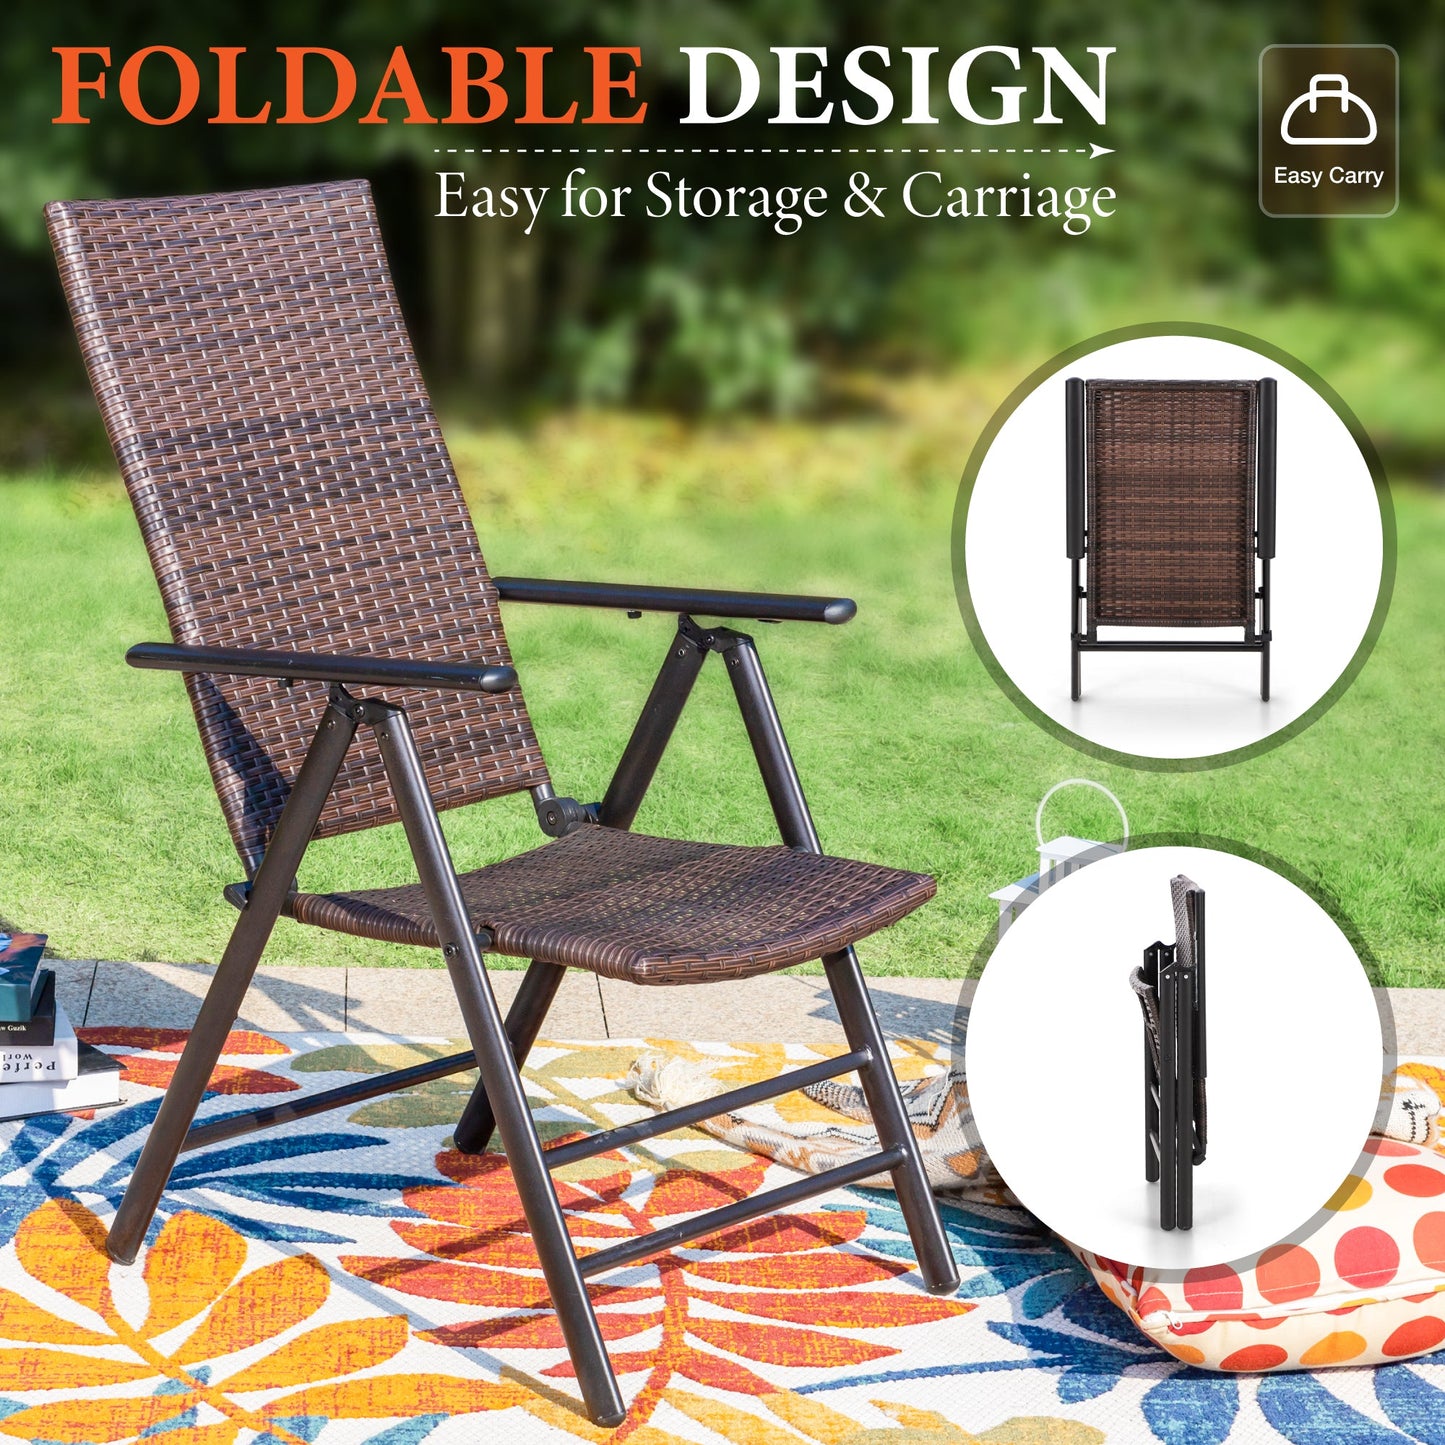 Sophia & William 7 Pieces Outdoor Patio Dining Set with Foldable Adjustable PE Rattan Chairs and Rectangular Metal Dining Table